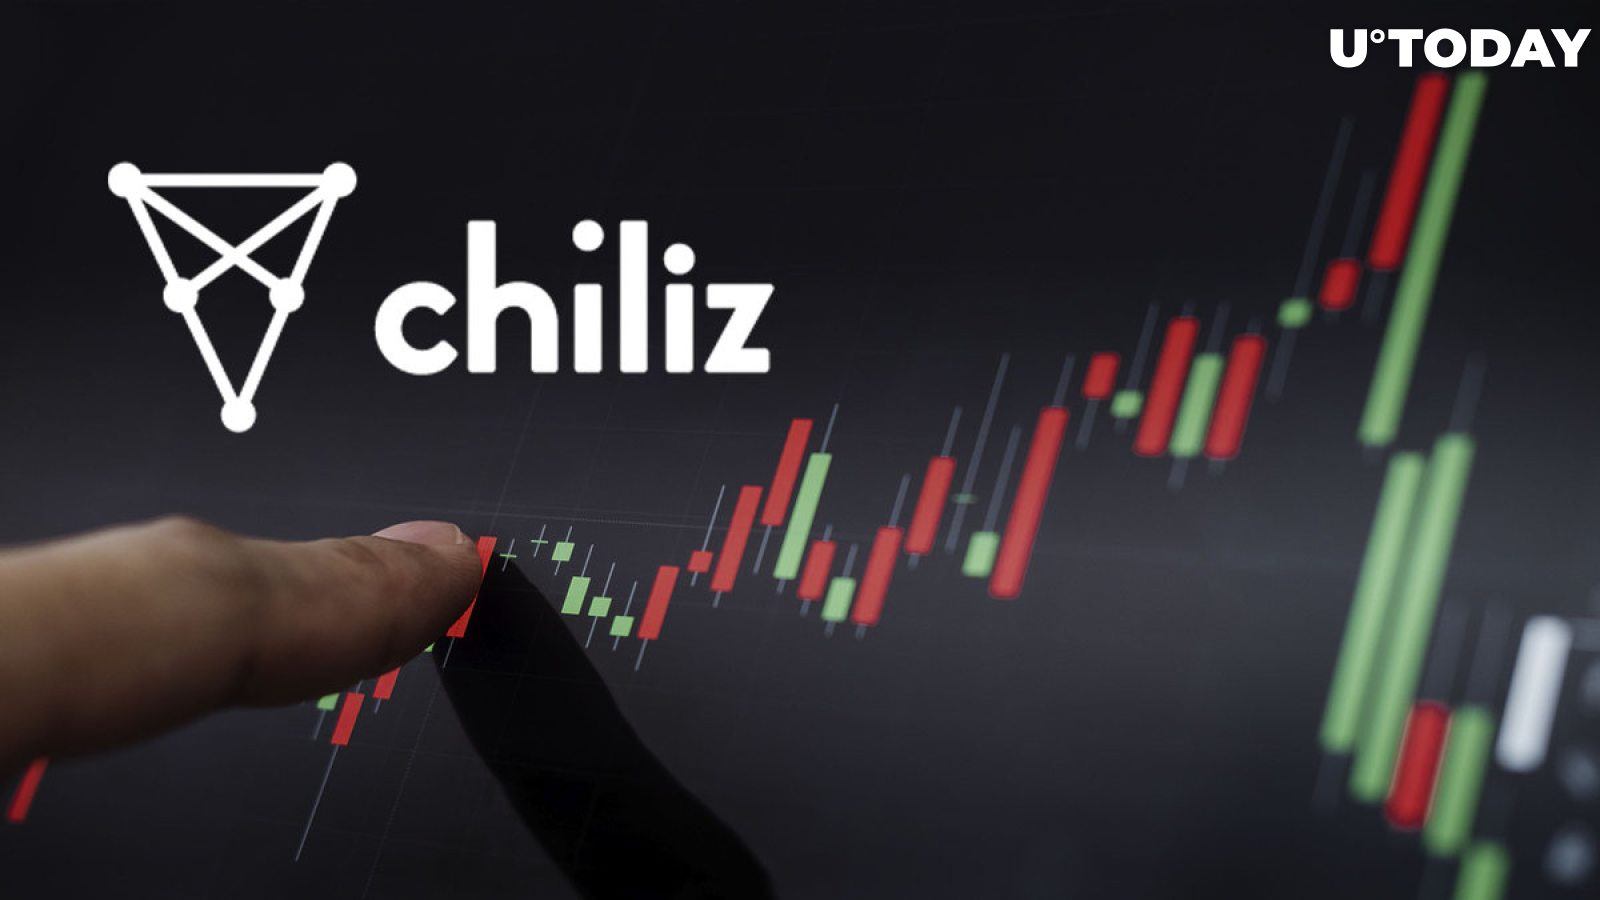 Chiliz (CHZ) on Verge of Breakout, Here Are 3 Reasons Why